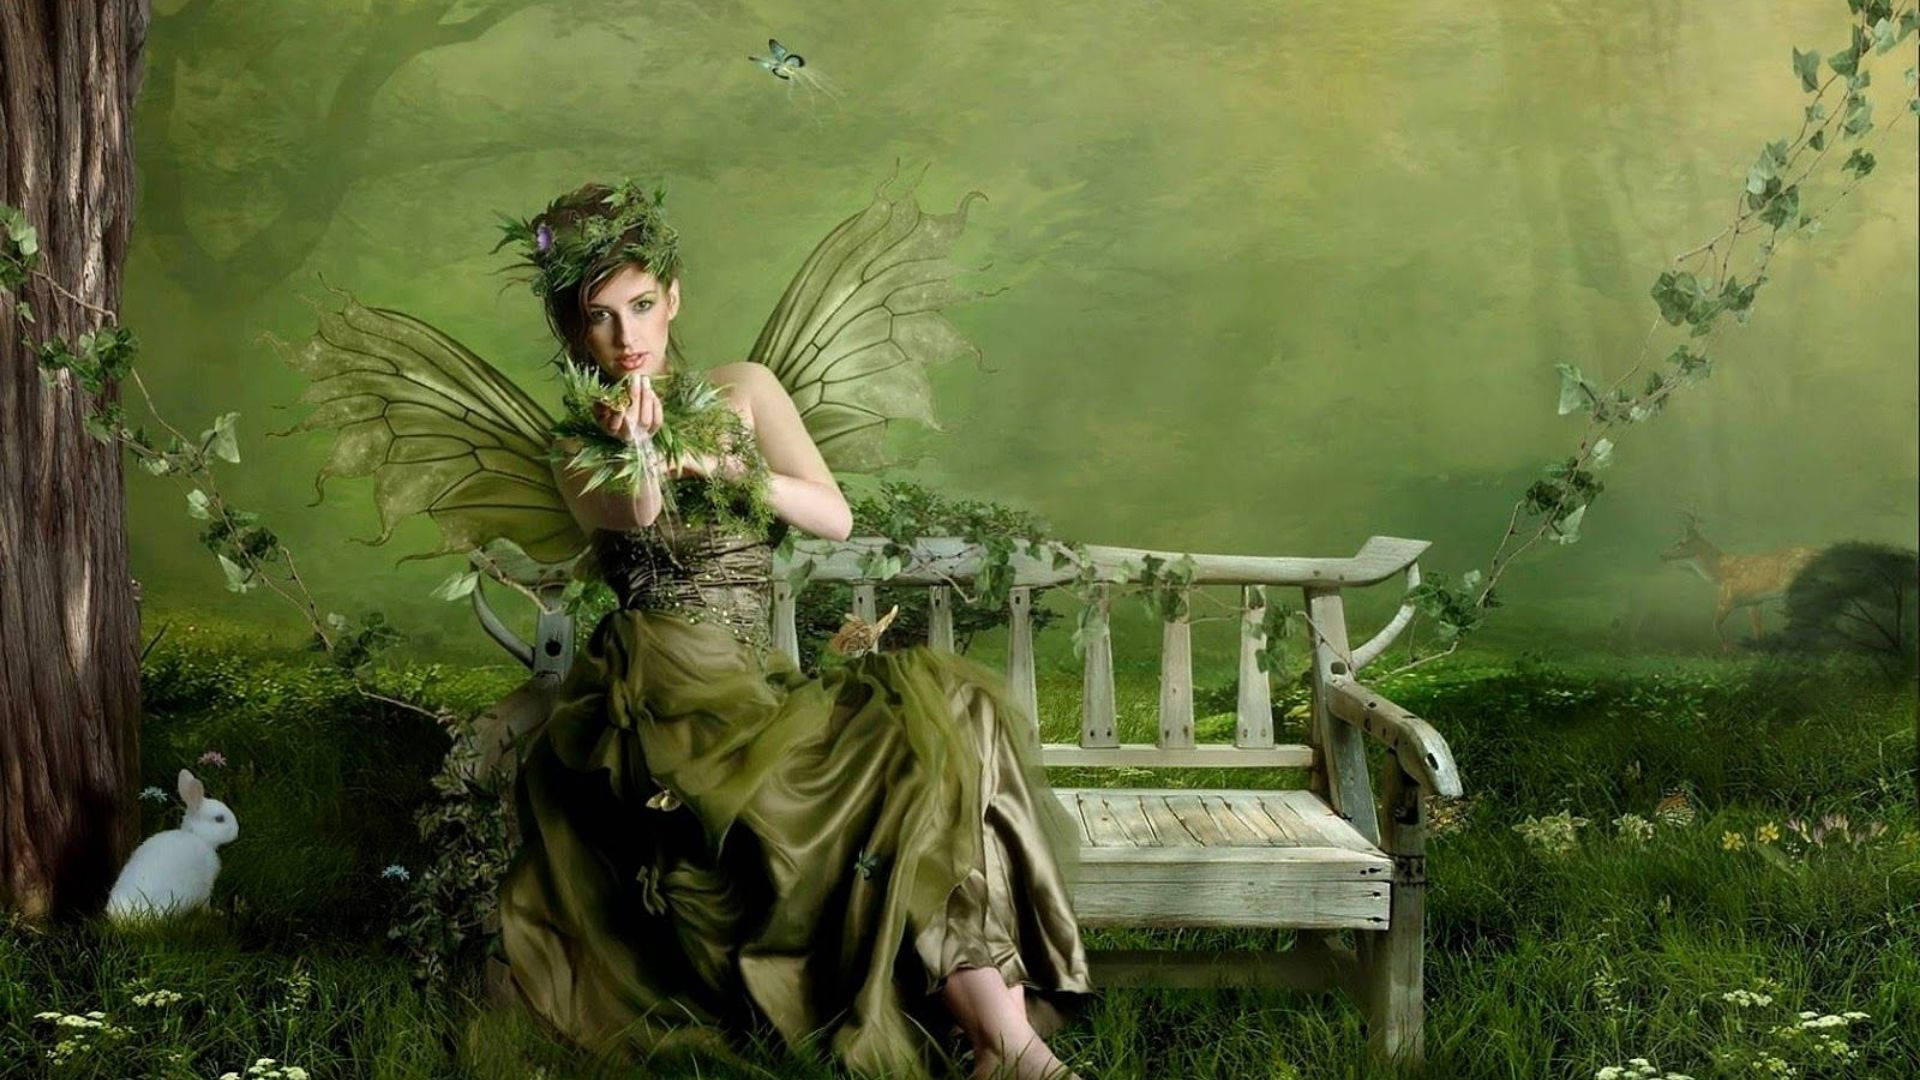 Fairy Aesthetic In Nature Wallpaper